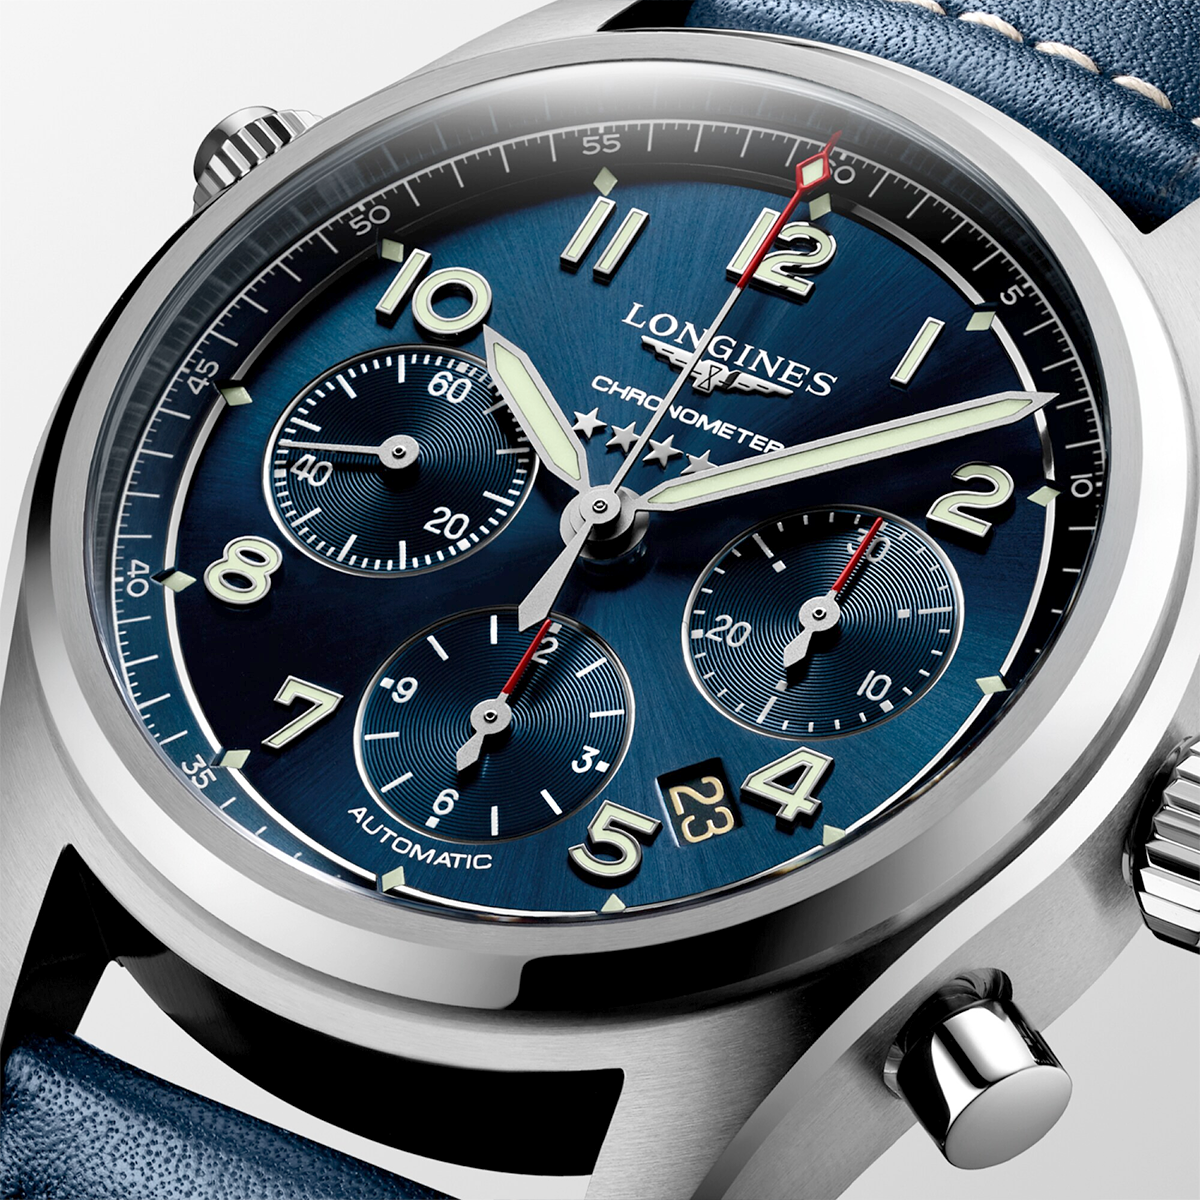 Spirit Chronograph 42mm Blue Dial Automatic Leather Strap Watch